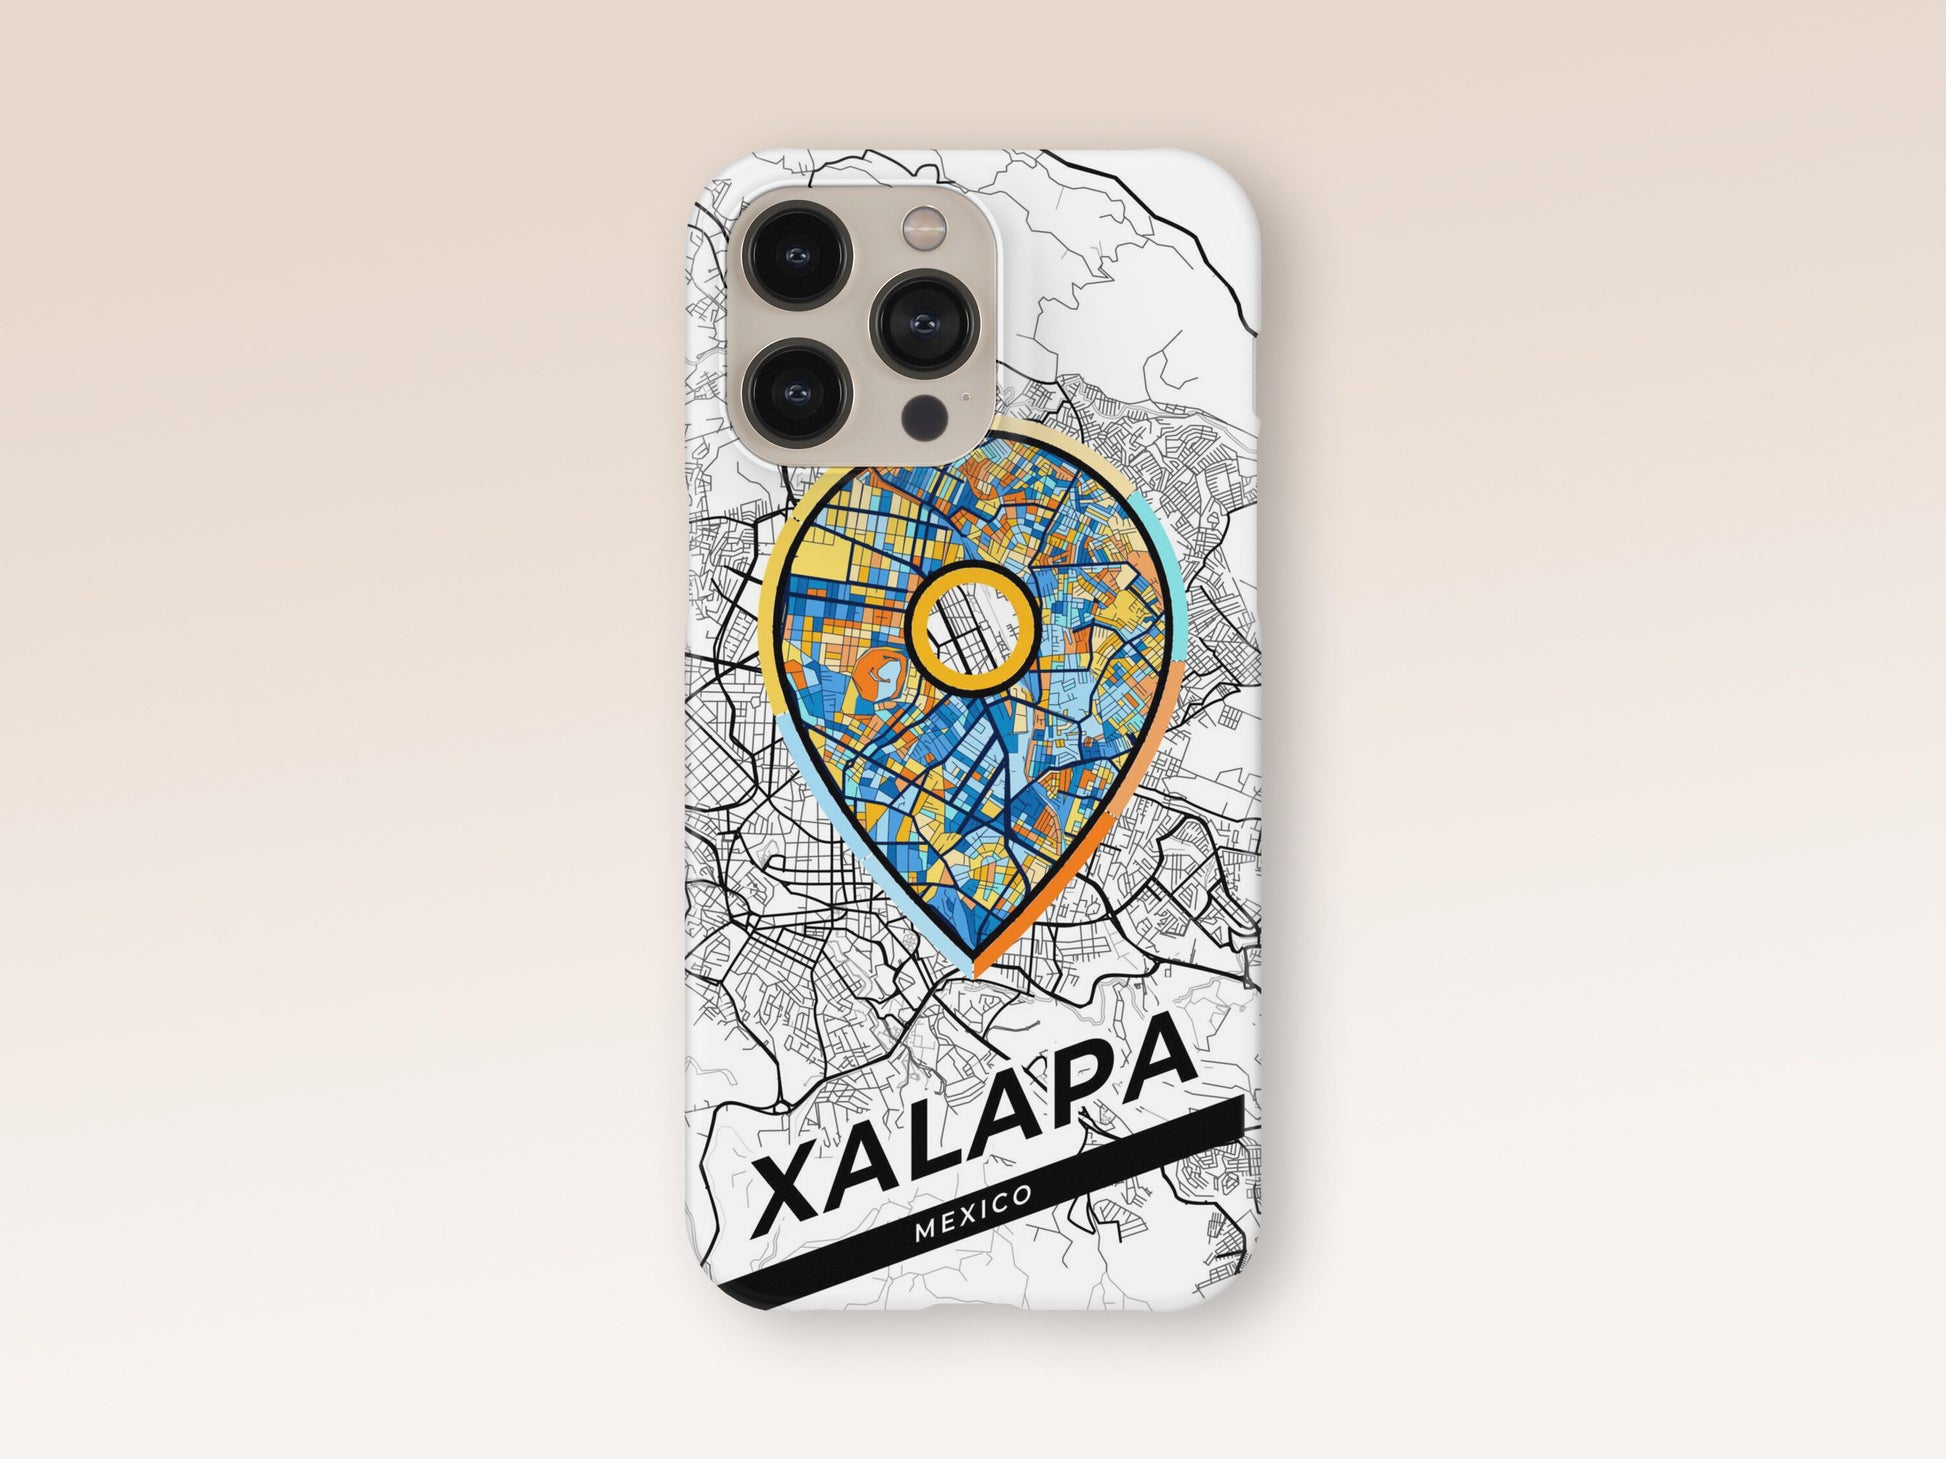 Xalapa Mexico slim phone case with colorful icon 1